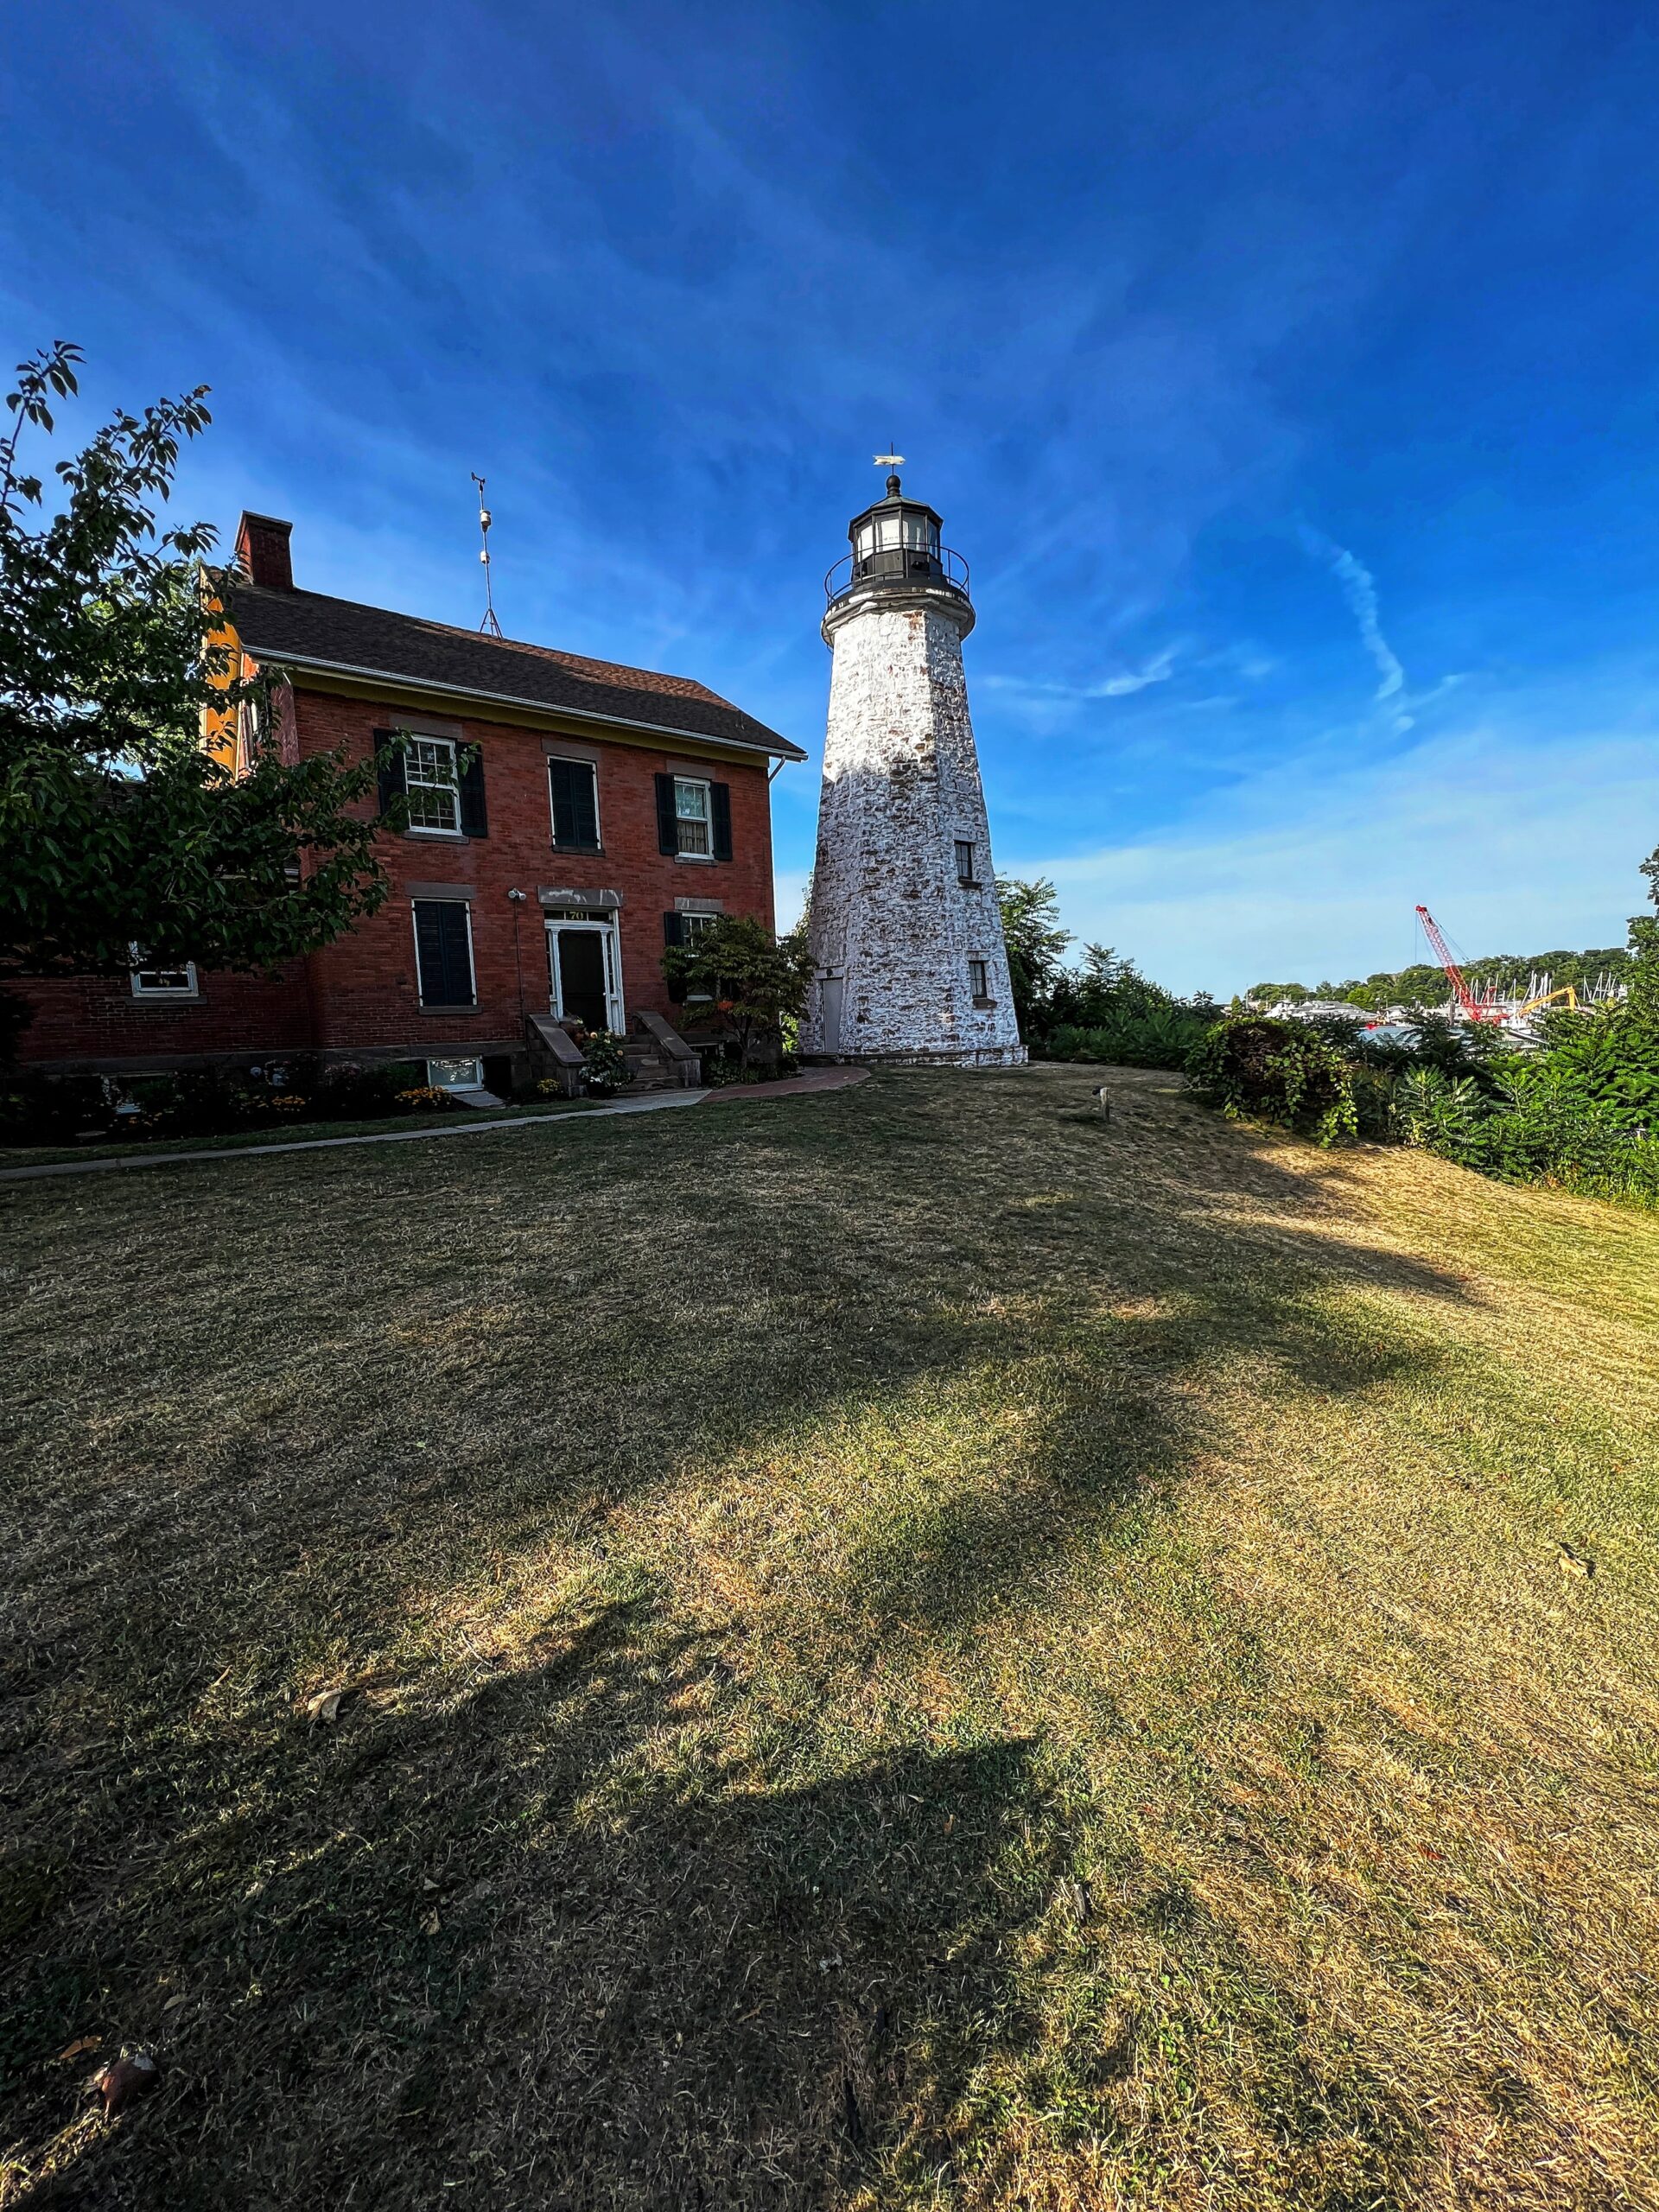 This lighthouse is at the top of a hill overlooking Charlotte Pier and Lake Ontario. Although it was closed, it is known to have a 40-foot-high, spiral staircase, after which one then climbs a ladder to the top to reach an opening in the ceiling to access the lantern room for an amazing view of the lake. 